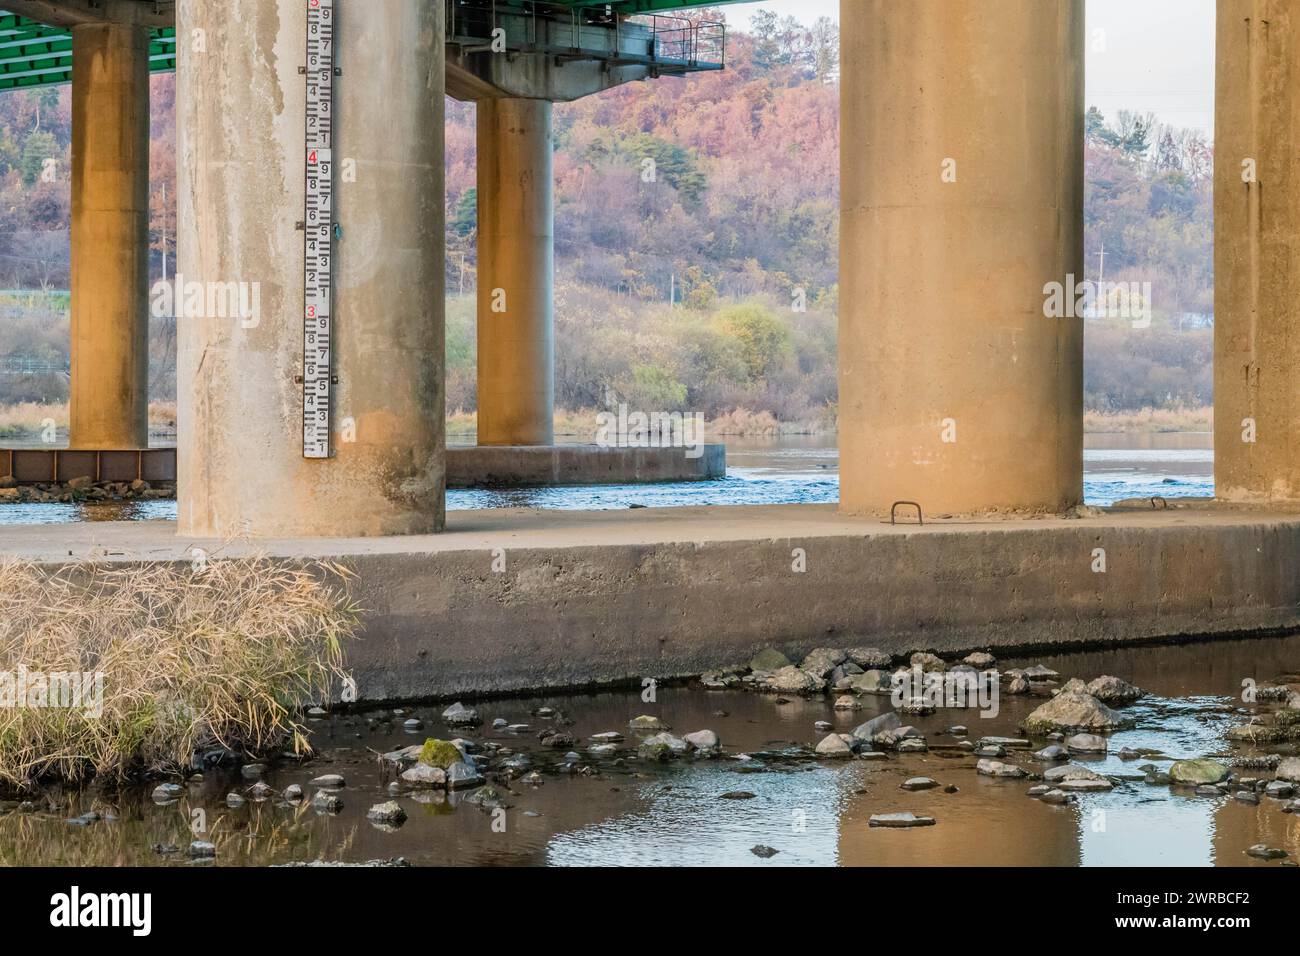 Pillars of a bridge over a river showing a water level gauge, with fall foliage around, in South Korea Stock Photo